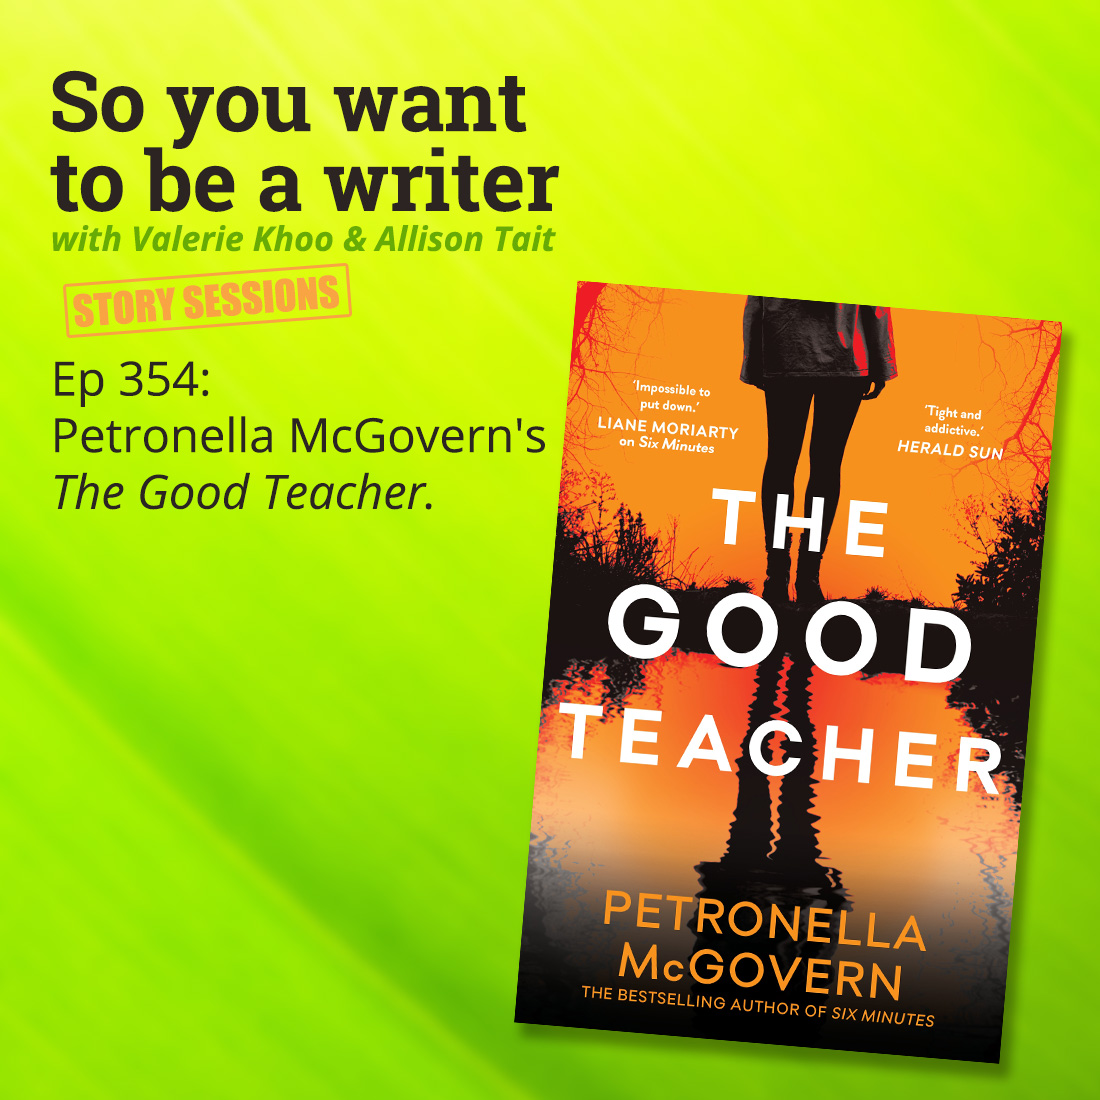 WRITER 354: Petronella McGovern's 'The Good Teacher' [Story Sessions series]